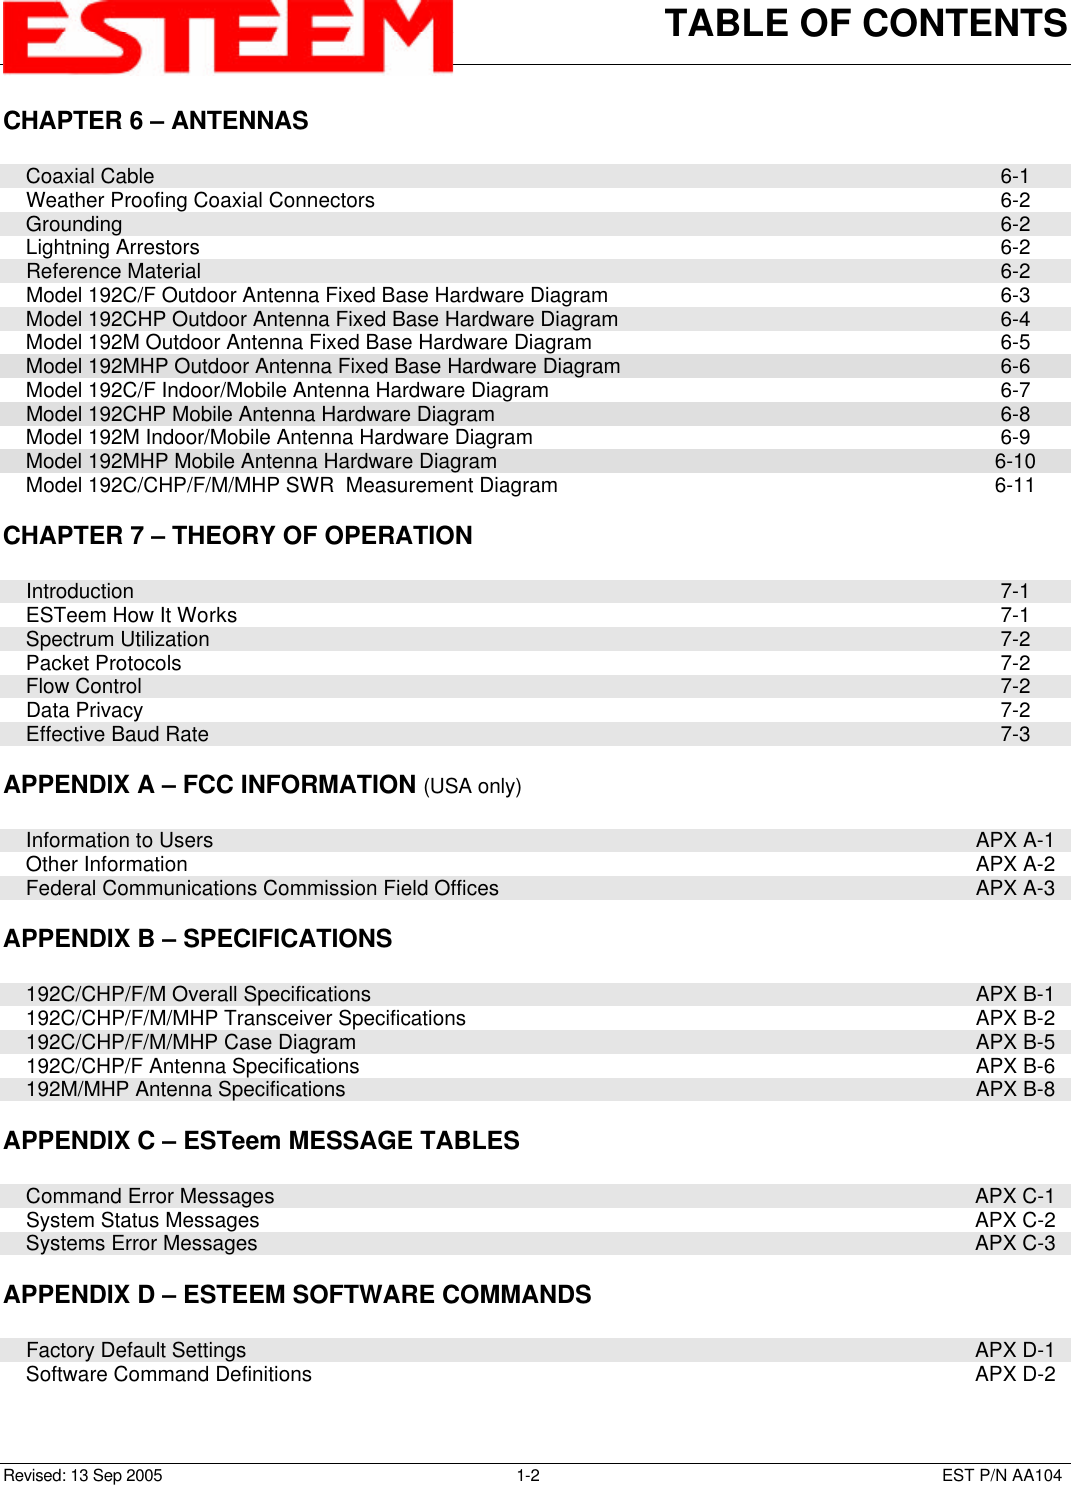 TABLE OF CONTENTSRevised: 13 Sep 2005 1-2 EST P/N AA104CHAPTER 6 – ANTENNAS    Coaxial Cable 6-1    Weather Proofing Coaxial Connectors 6-2    Grounding 6-2    Lightning Arrestors 6-2    Reference Material 6-2    Model 192C/F Outdoor Antenna Fixed Base Hardware Diagram 6-3    Model 192CHP Outdoor Antenna Fixed Base Hardware Diagram 6-4    Model 192M Outdoor Antenna Fixed Base Hardware Diagram 6-5    Model 192MHP Outdoor Antenna Fixed Base Hardware Diagram 6-6    Model 192C/F Indoor/Mobile Antenna Hardware Diagram 6-7    Model 192CHP Mobile Antenna Hardware Diagram 6-8    Model 192M Indoor/Mobile Antenna Hardware Diagram 6-9    Model 192MHP Mobile Antenna Hardware Diagram 6-10    Model 192C/CHP/F/M/MHP SWR  Measurement Diagram 6-11CHAPTER 7 – THEORY OF OPERATION    Introduction 7-1    ESTeem How It Works 7-1    Spectrum Utilization 7-2    Packet Protocols 7-2    Flow Control 7-2    Data Privacy 7-2    Effective Baud Rate 7-3APPENDIX A – FCC INFORMATION (USA only)    Information to Users APX A-1    Other Information APX A-2    Federal Communications Commission Field Offices APX A-3APPENDIX B – SPECIFICATIONS    192C/CHP/F/M Overall Specifications APX B-1    192C/CHP/F/M/MHP Transceiver Specifications APX B-2    192C/CHP/F/M/MHP Case Diagram APX B-5    192C/CHP/F Antenna Specifications APX B-6    192M/MHP Antenna Specifications APX B-8APPENDIX C – ESTeem MESSAGE TABLES    Command Error Messages APX C-1    System Status Messages APX C-2    Systems Error Messages APX C-3APPENDIX D – ESTEEM SOFTWARE COMMANDS    Factory Default Settings APX D-1    Software Command Definitions APX D-2